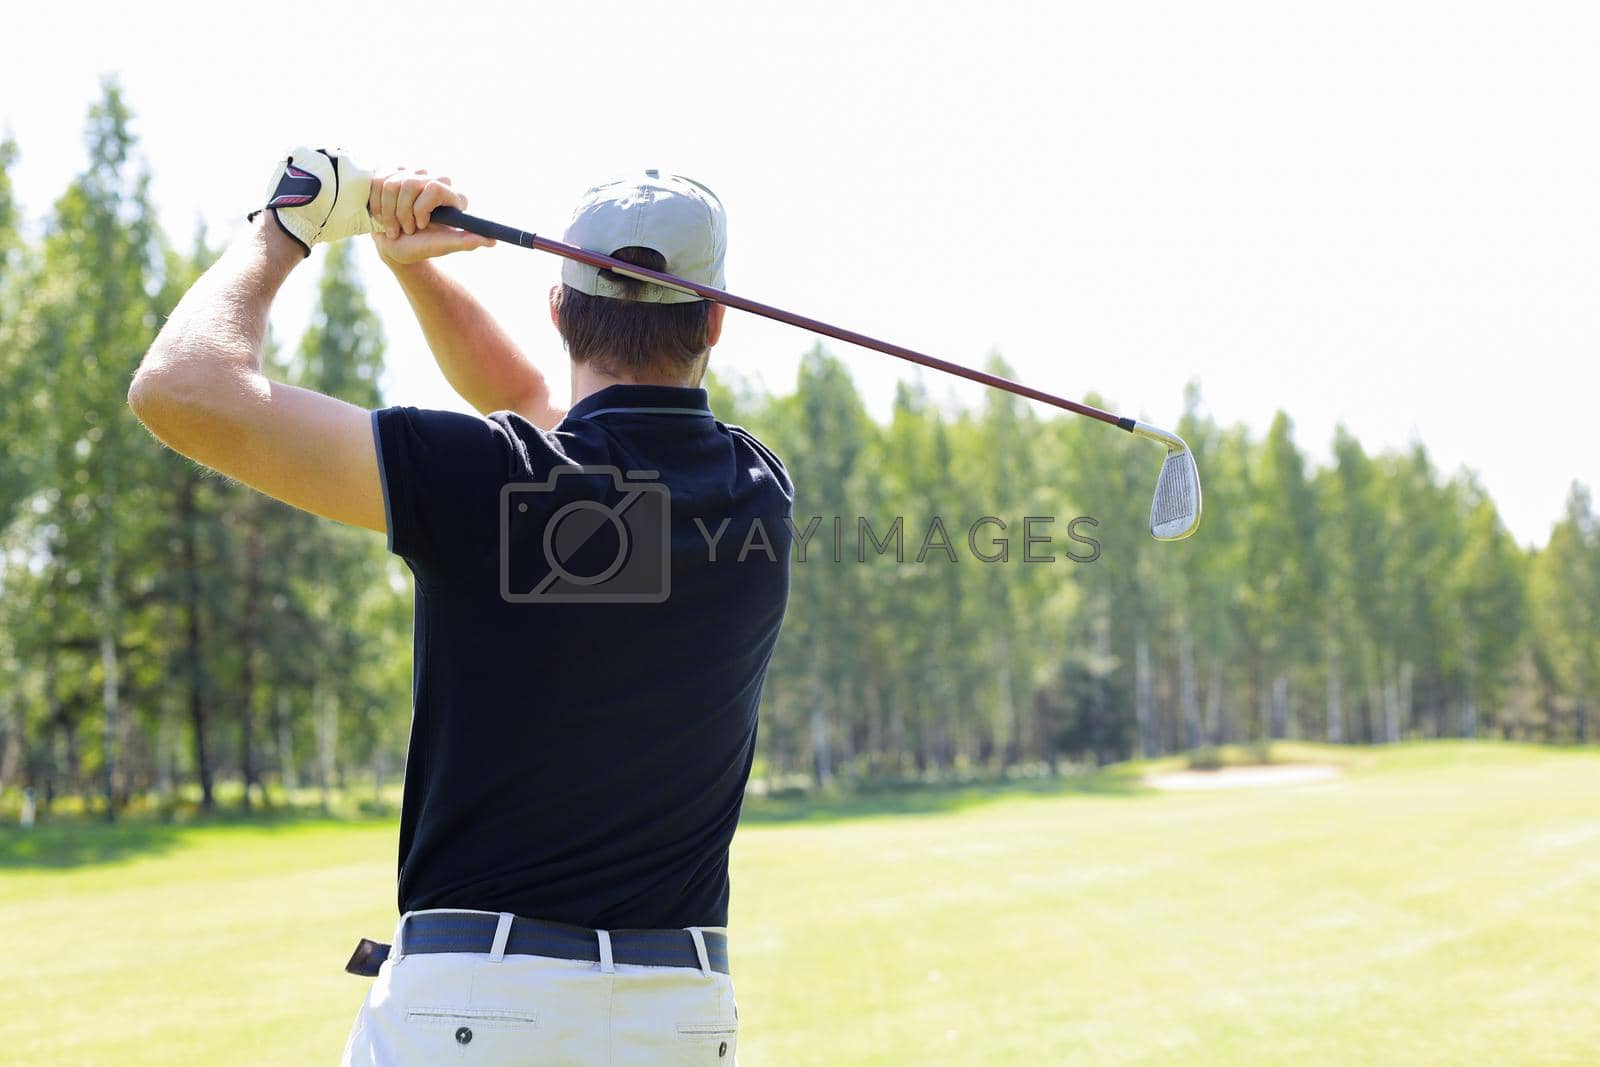 Royalty free image of Golfer hits an fairway shot towards the club house. by tsyhun